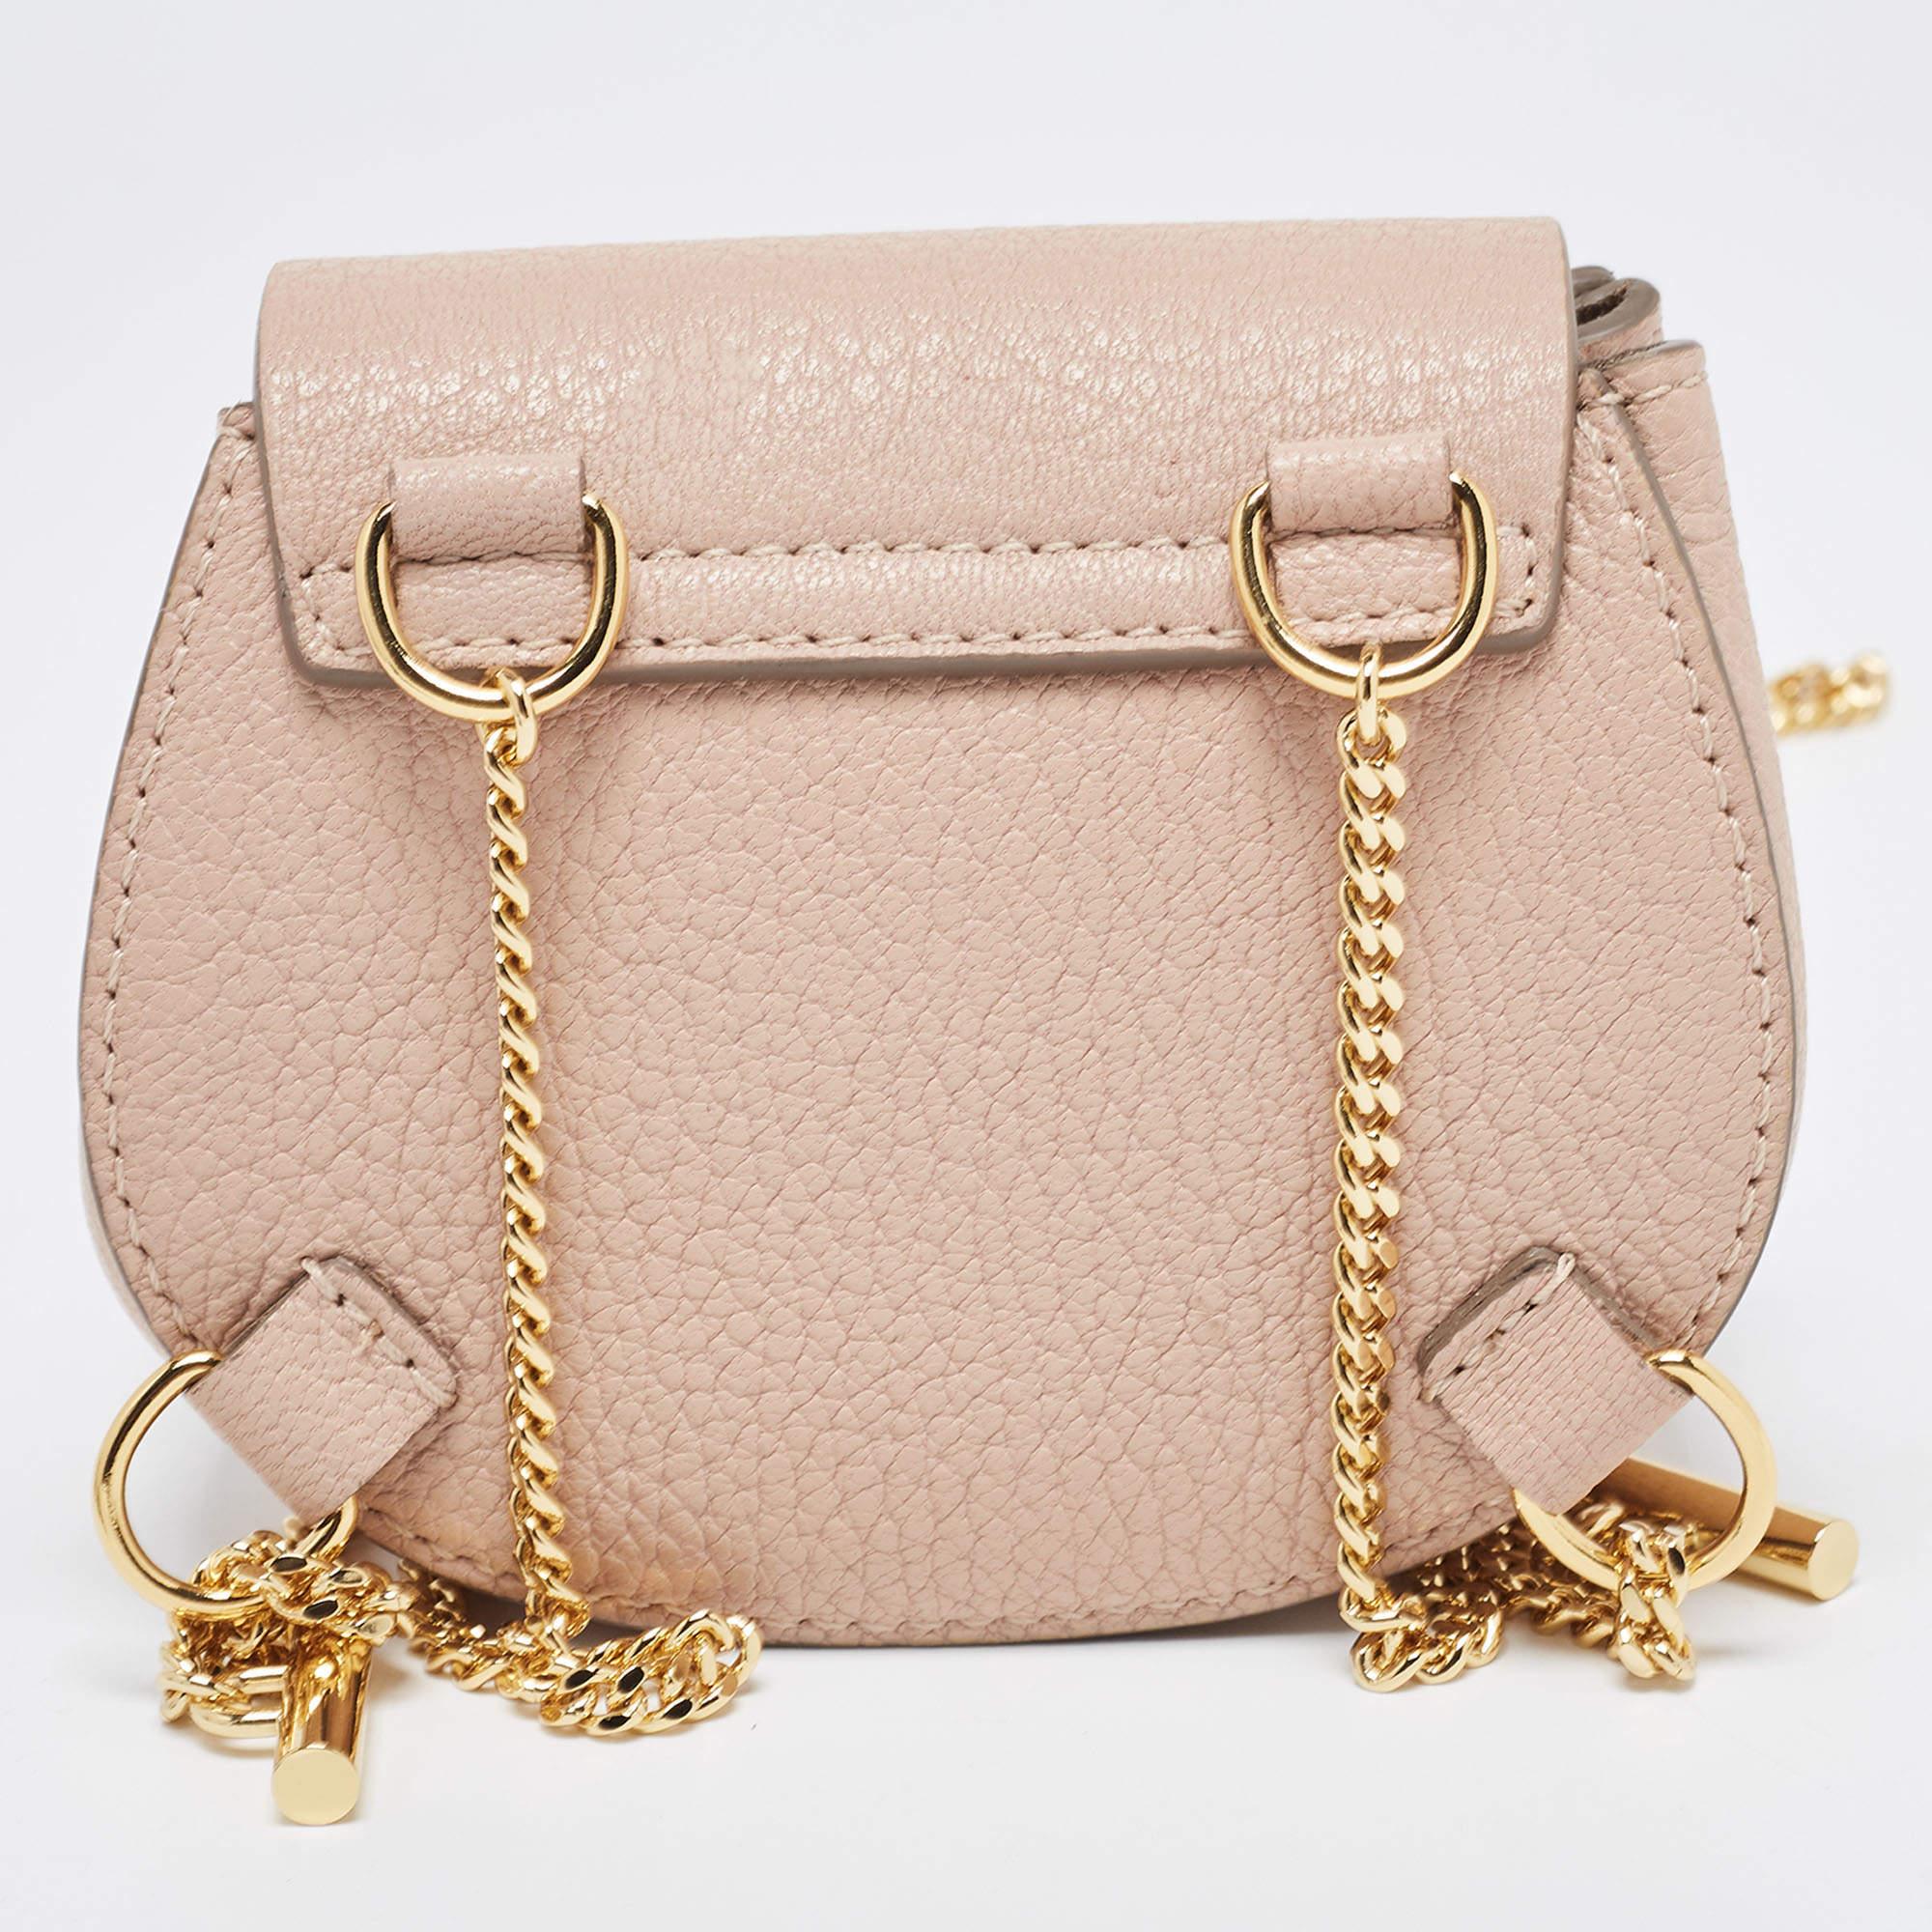 The Chloé Drew Backpack is a chic and compact accessory. Crafted from soft blush pink leather, it features a stylish flap closure with a gold-tone turn-lock clasp, shoulder straps, and a petite yet functional size perfect for carrying essentials in